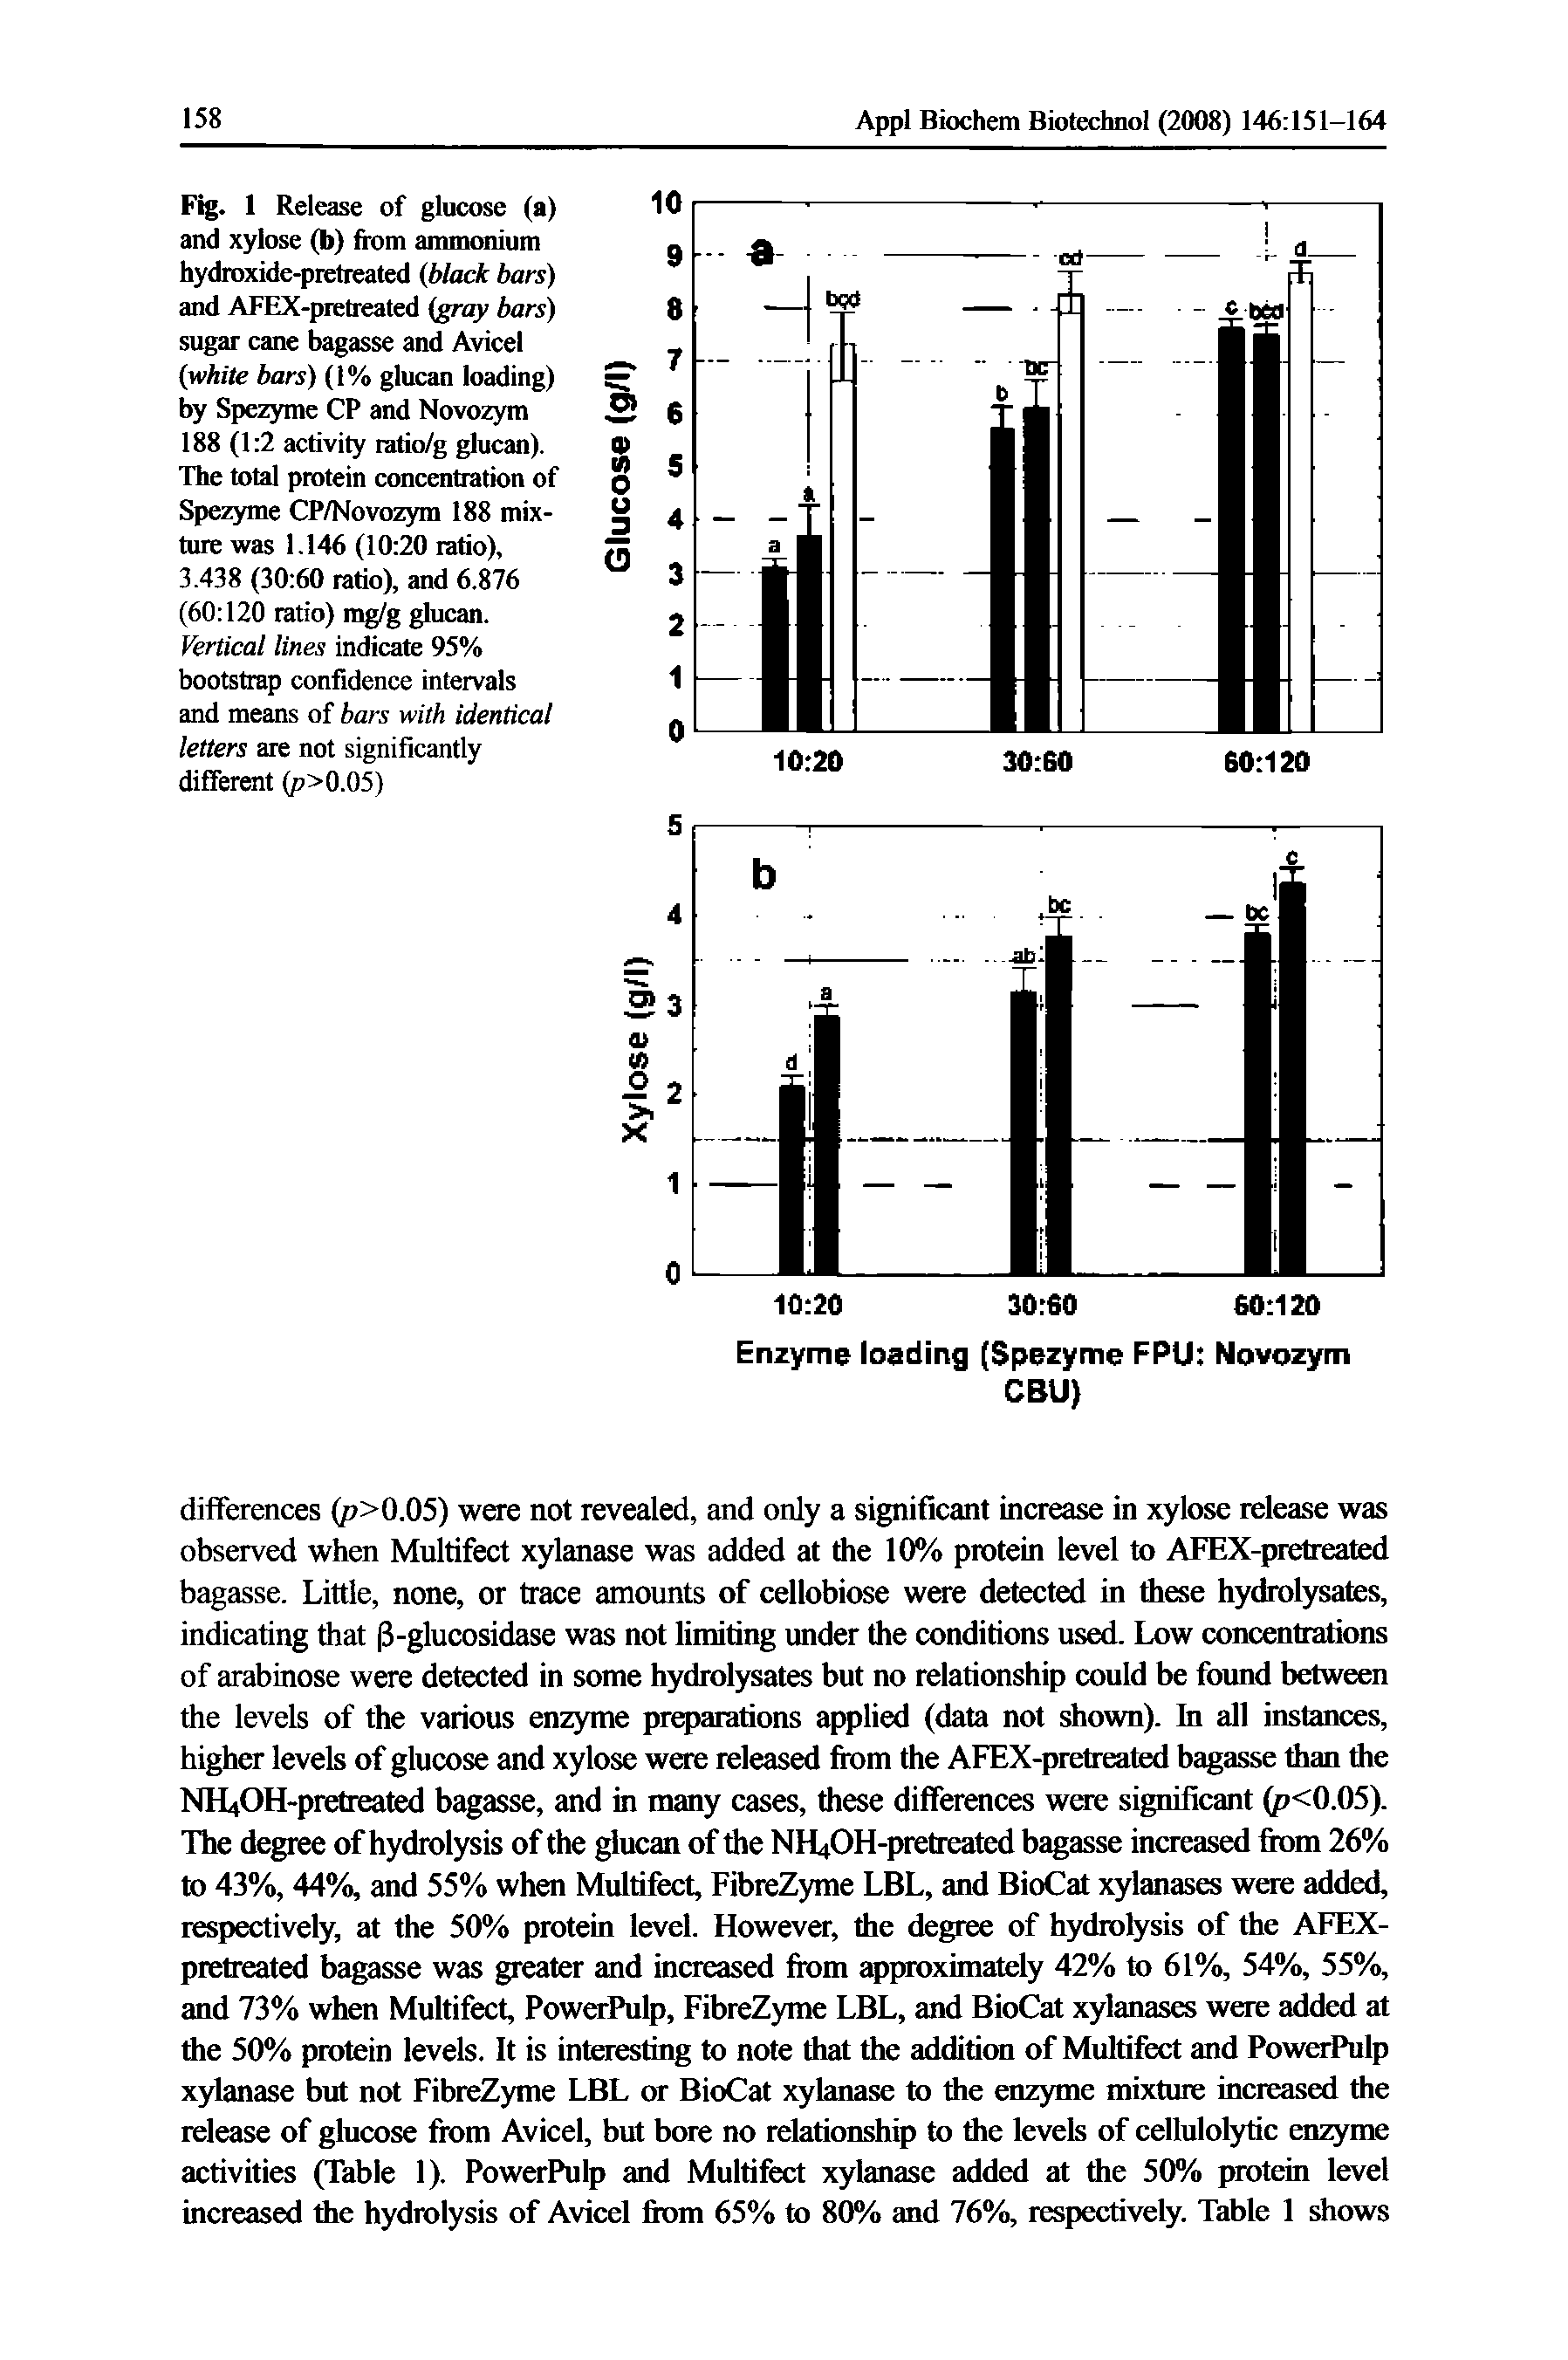 Fig. 1 Release of glucose (a) and xylose (b) from ammonium hydroxide-pretreated (black bars) and AFEX-pretreated (gray bars) sugar cane bagasse and Avicel (yvhite bars) (1% glucan loading) by Spezyme CP and Novozym 188 (1 2 activity ratio/g glucan). The total protein concentration of Spezyme CP/Novozym 188 mixture was 1.146 (10 20 ratio), 3.438 (30 60 ratio), and 6.876 (60 120 ratio) mg/g glucan. Vertical lines indicate 95% bootstrap confidence intervals and means of bars with identical letters are not significantly different (p>0.05)...